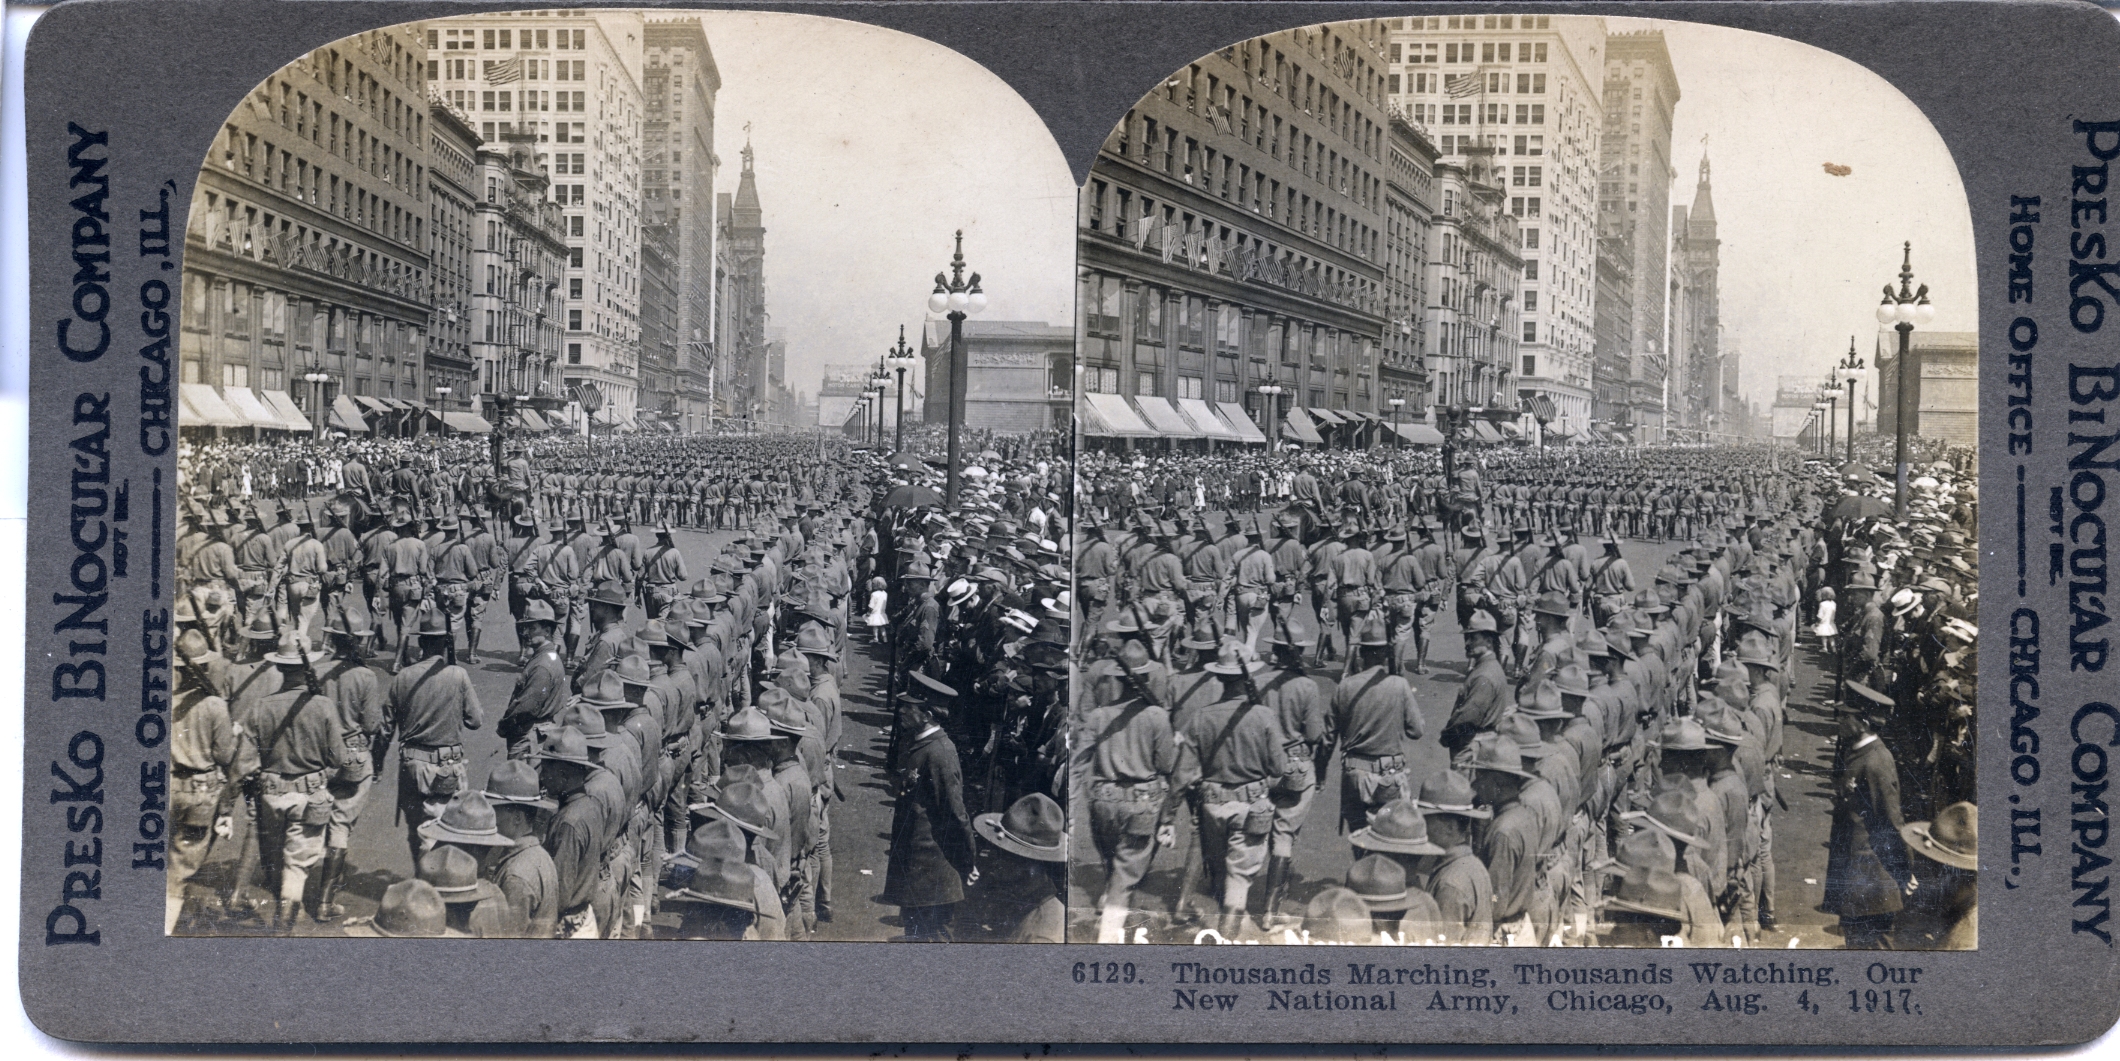 Thousands Marching, Thousands Watching. Our New National Army, Chicago, Aug. 4, 1917